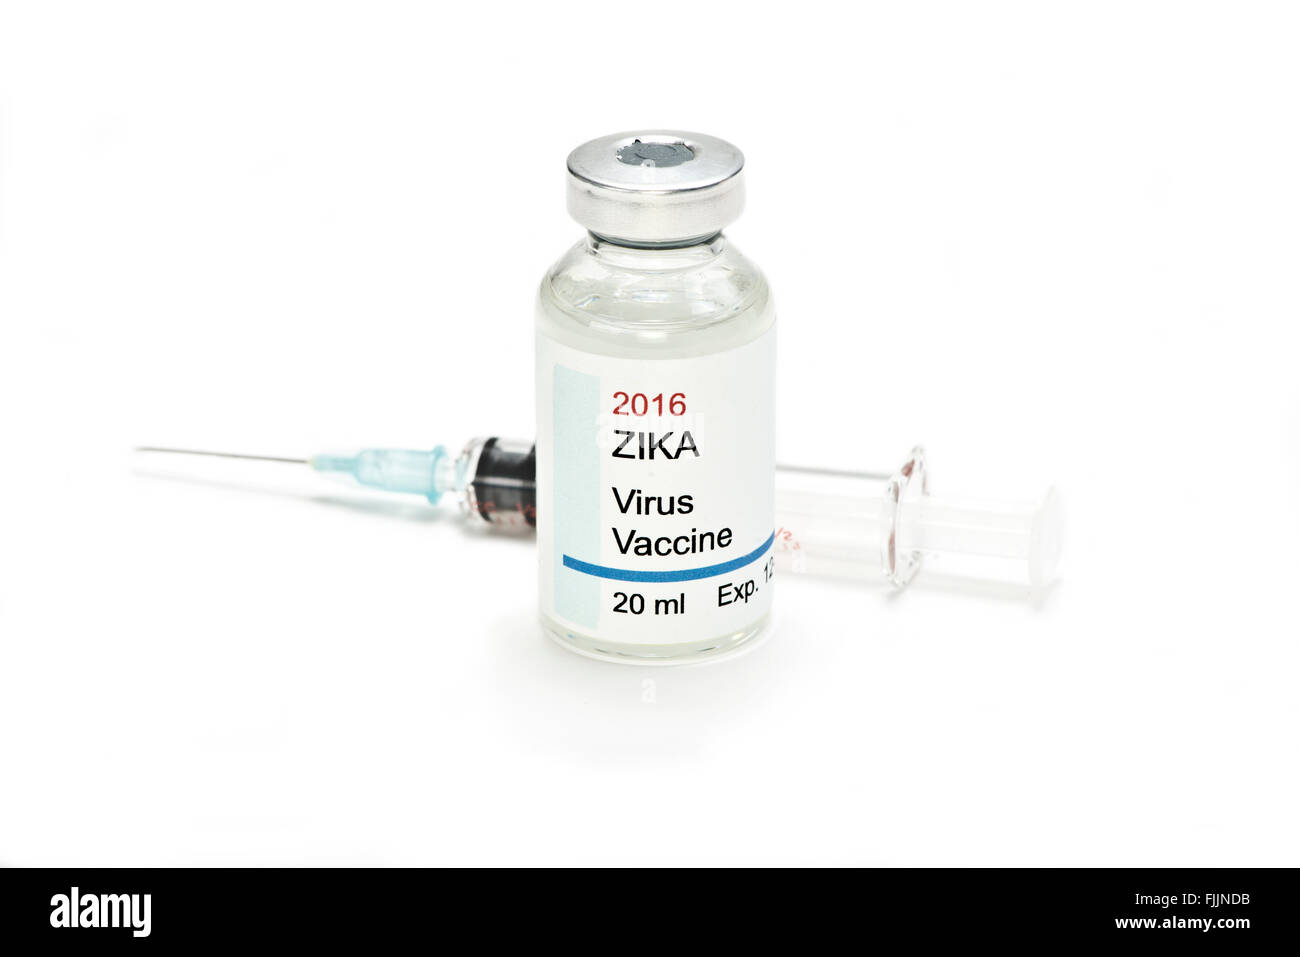 Zika fever vaccine vial with syringe.  Labels are fictitious and created by photographer. Stock Photo